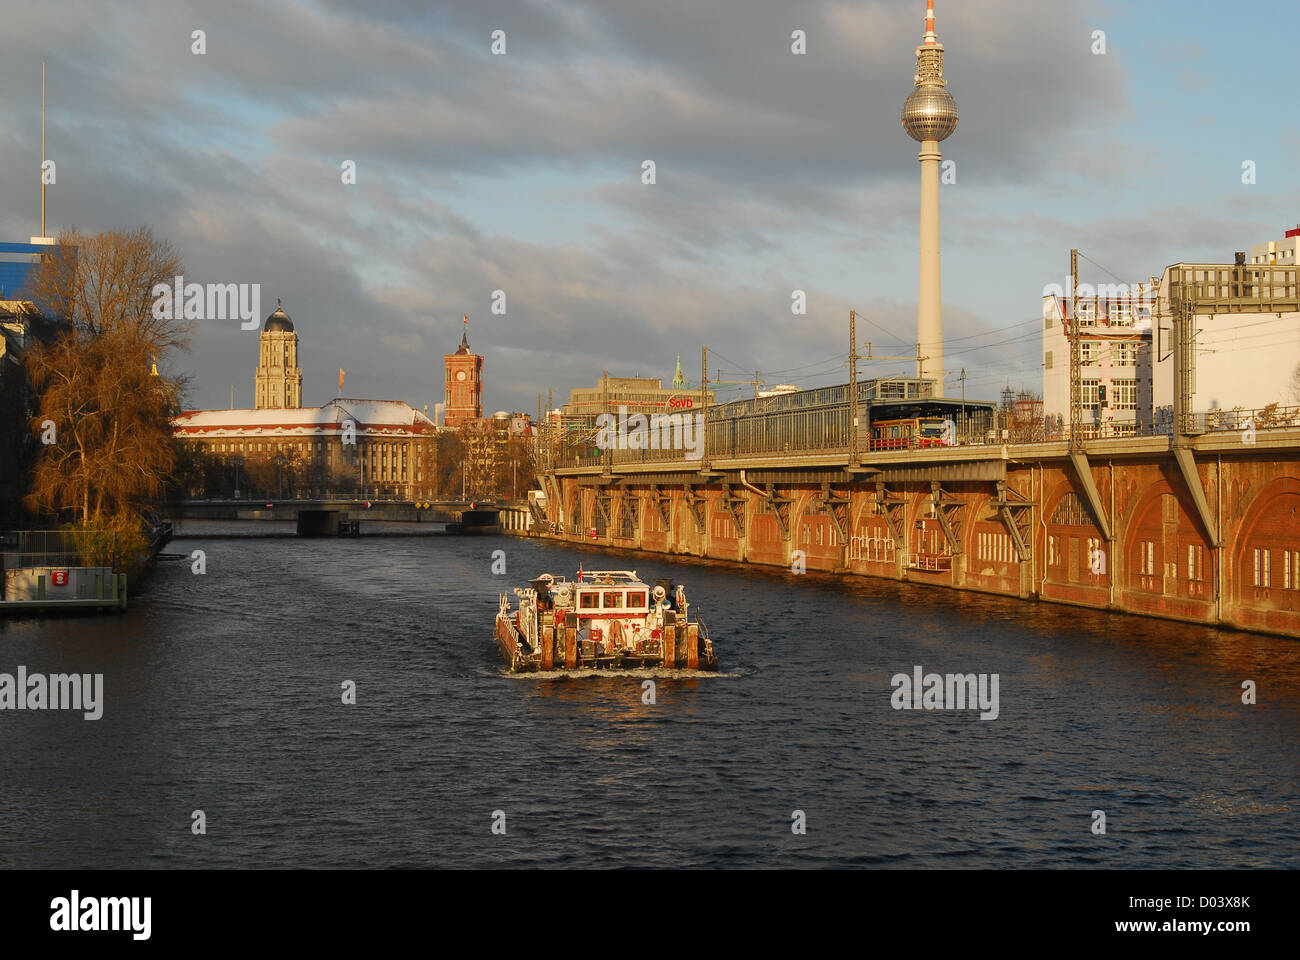 View over Spree River with Tv Tower and boat on the river, Berlin Germany, winter 2008. Stock Photo